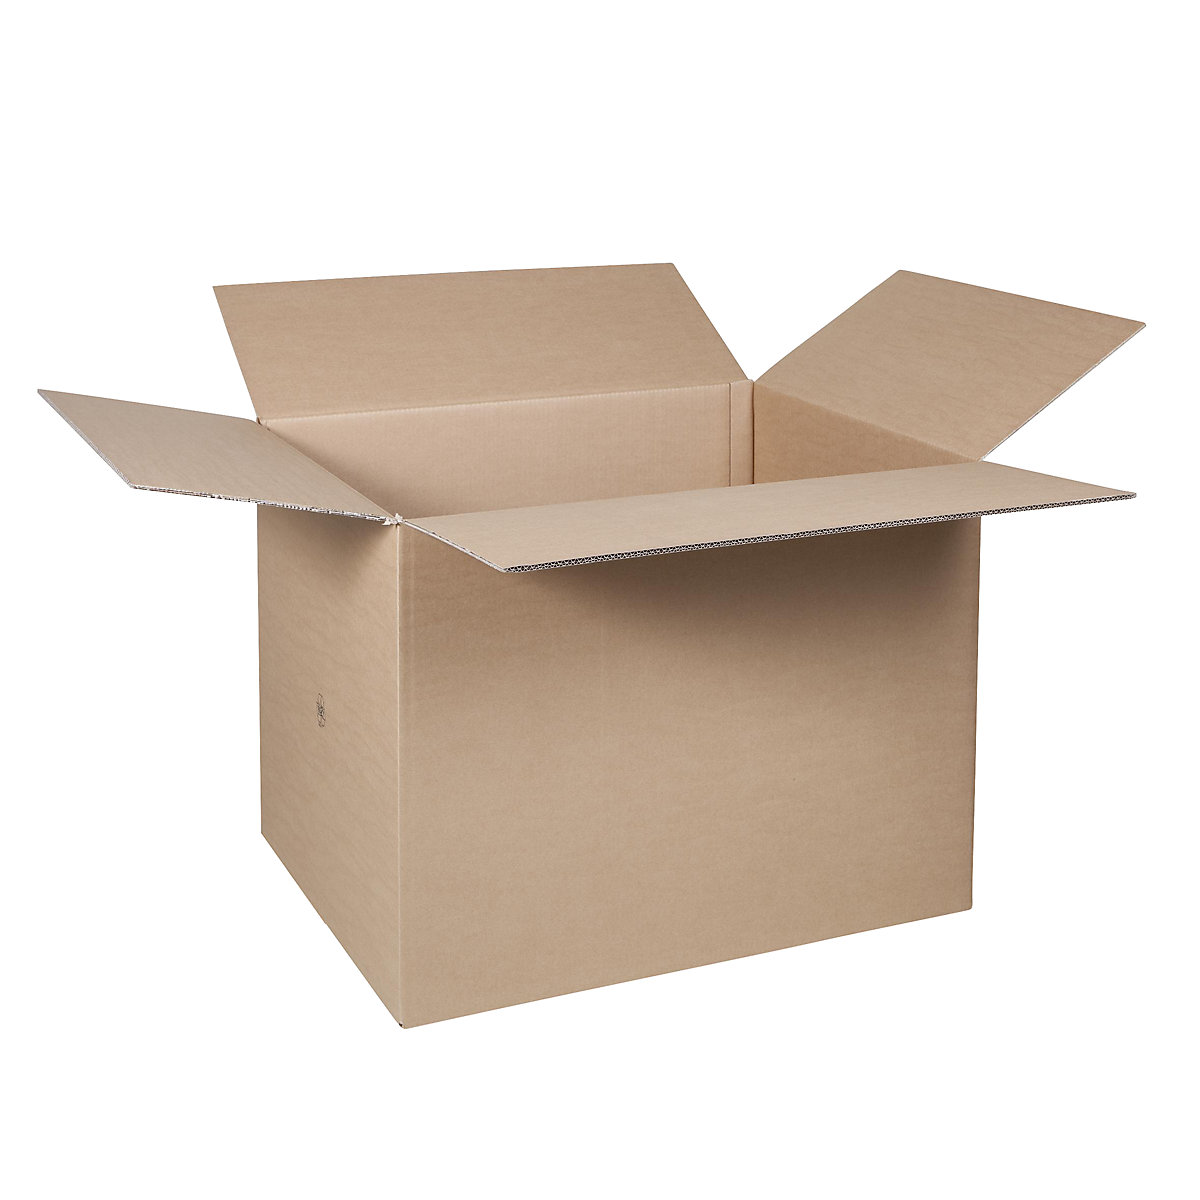 Folding cardboard box, FEFCO 0201, made of double fluted cardboard, internal dimensions 600 x 400 x 400 mm, pack of 100-50